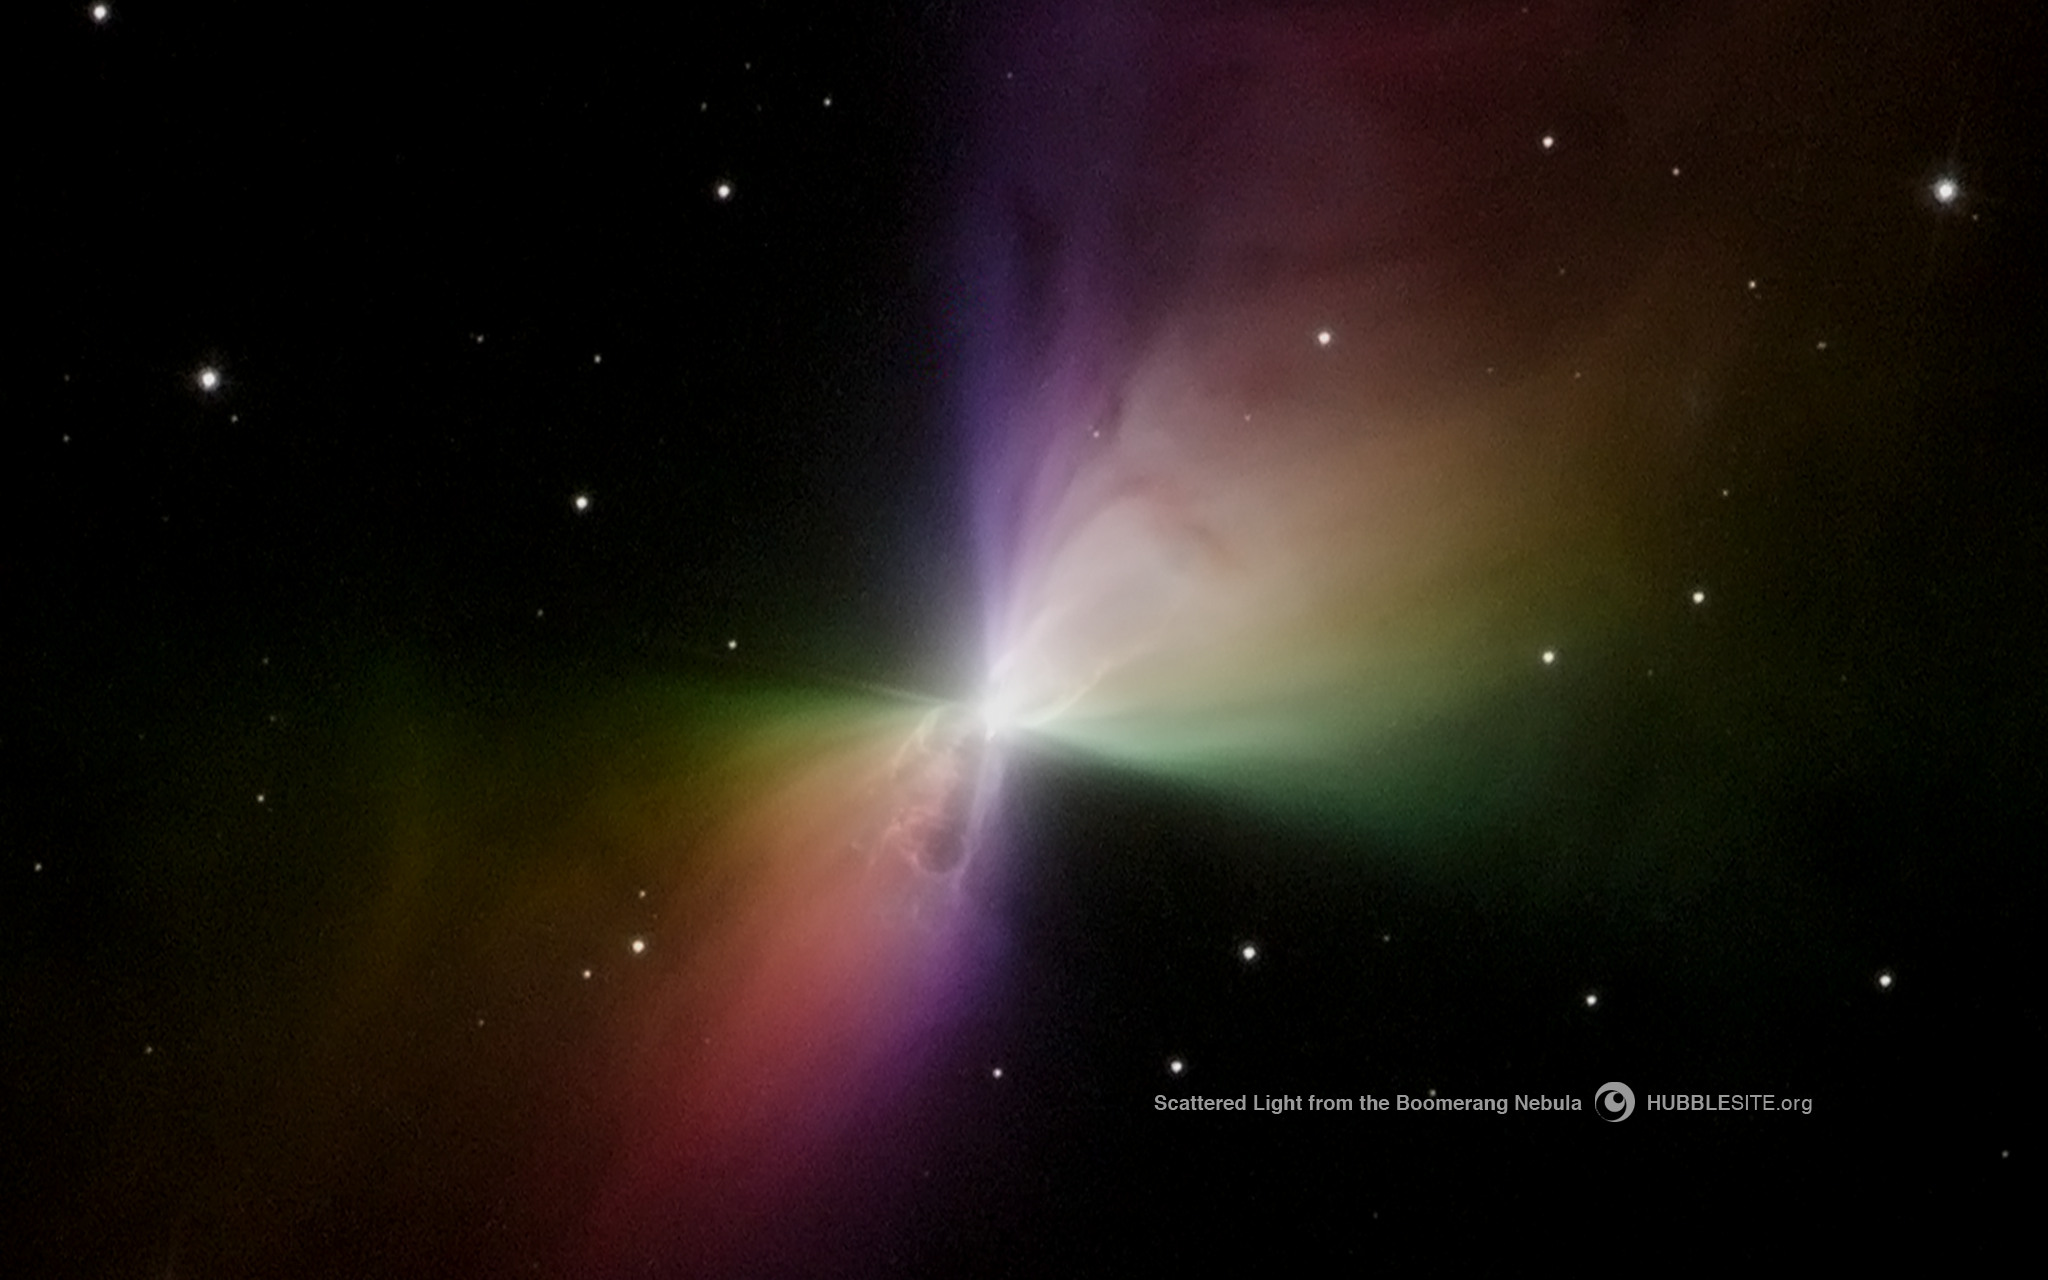 Scattered Light from the Boomerang Nebula